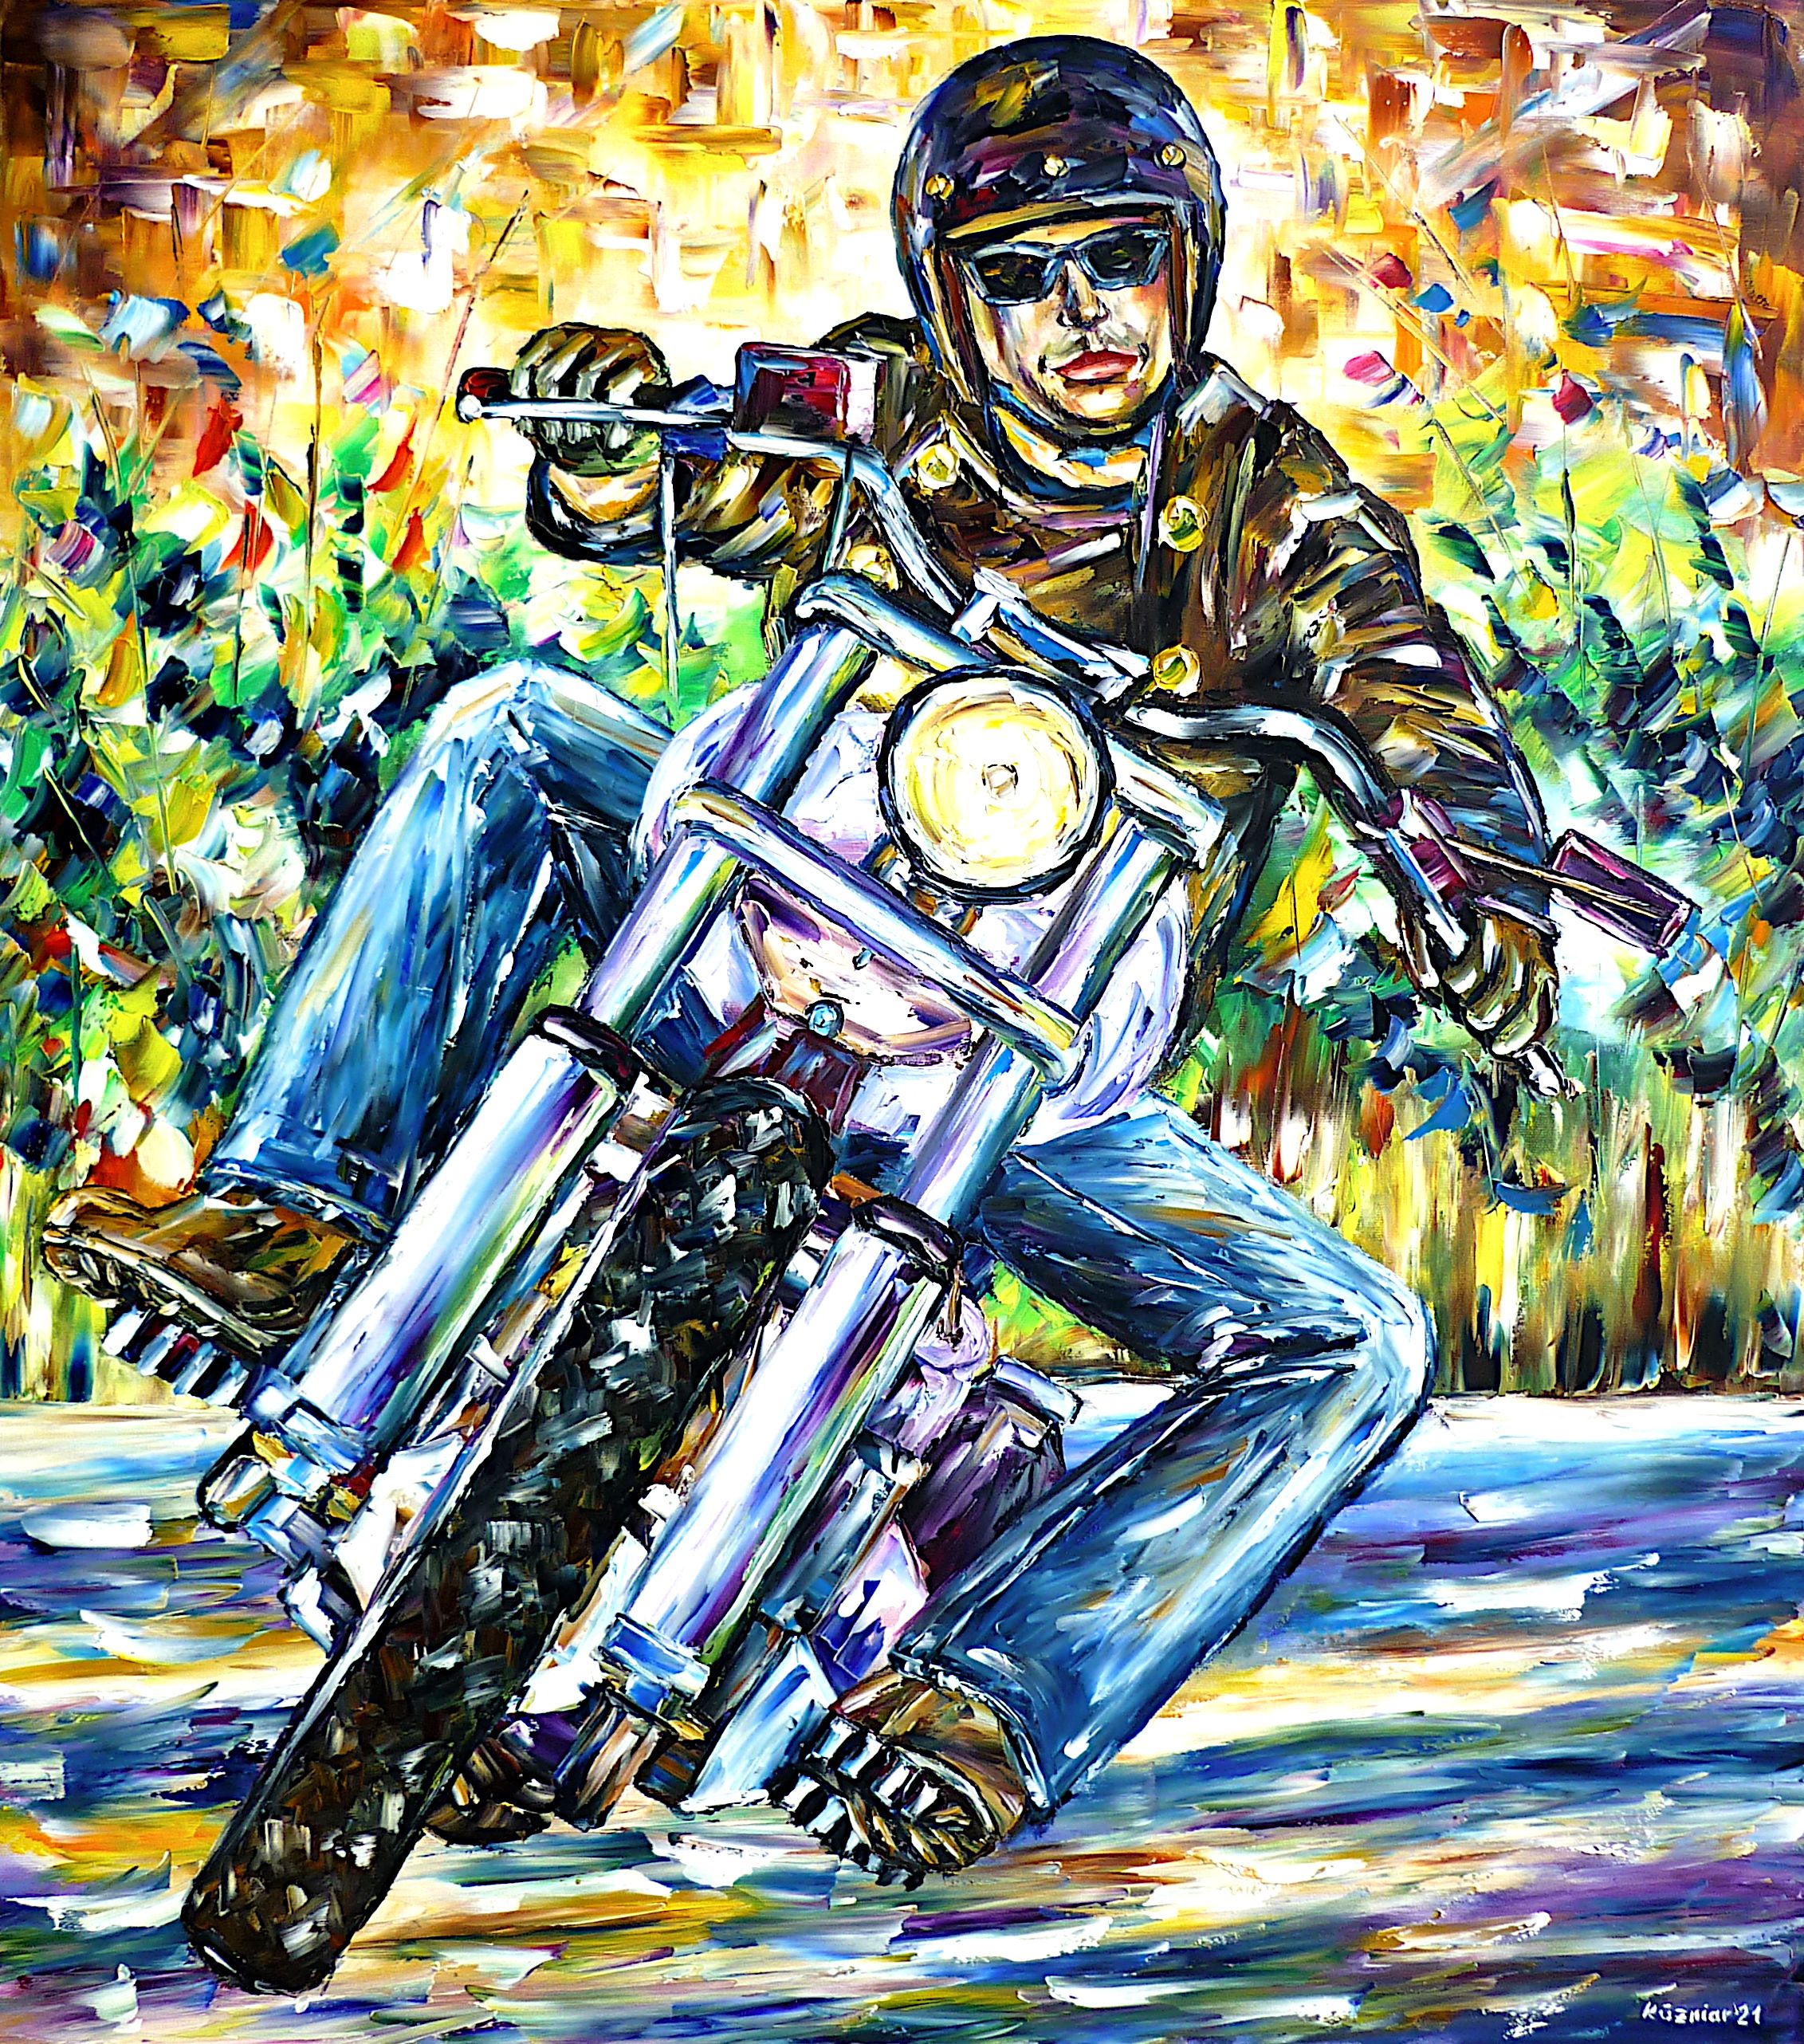 motorcyclist,motorcycling,harleydavidson,chopperdriver,chopper,easyriderfeeling,motorcyclefans,motorcyclelove,rocker,rockerpainting,hellsangels,freedom,beingfree,realmen,chopperfans,chopperlovers,chopperpainting,chopperpicture,manonaharley,harleyfans,harleylovers,onaharleypainting,harleyrider,joy,friendlypicture,friendlypainting,peace,peacefulpicture,peacefulpainting,paletteknifeoilpainting,modernart,impressionism,expressionism,figurative,abstractpainting,livelycolours,colorfulpainting,brightcolors,lightreflections,impastopainting,livingroomart,livingroompicture,livingroompainting